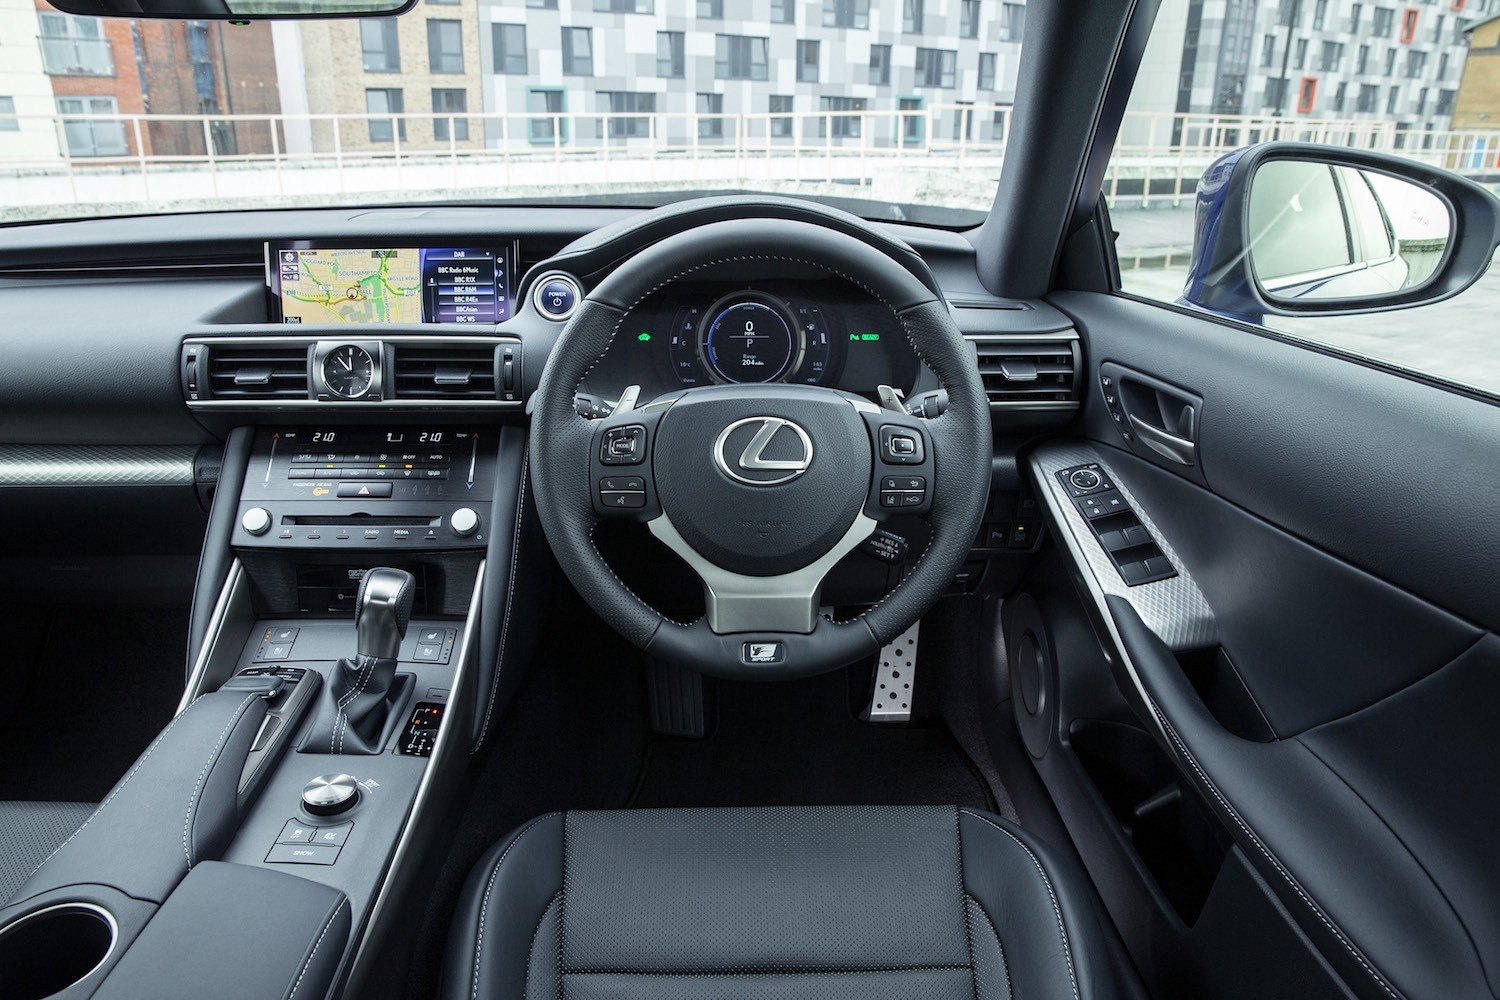 Neil Lyndon reviews the Lexus IS300h for Drive 13